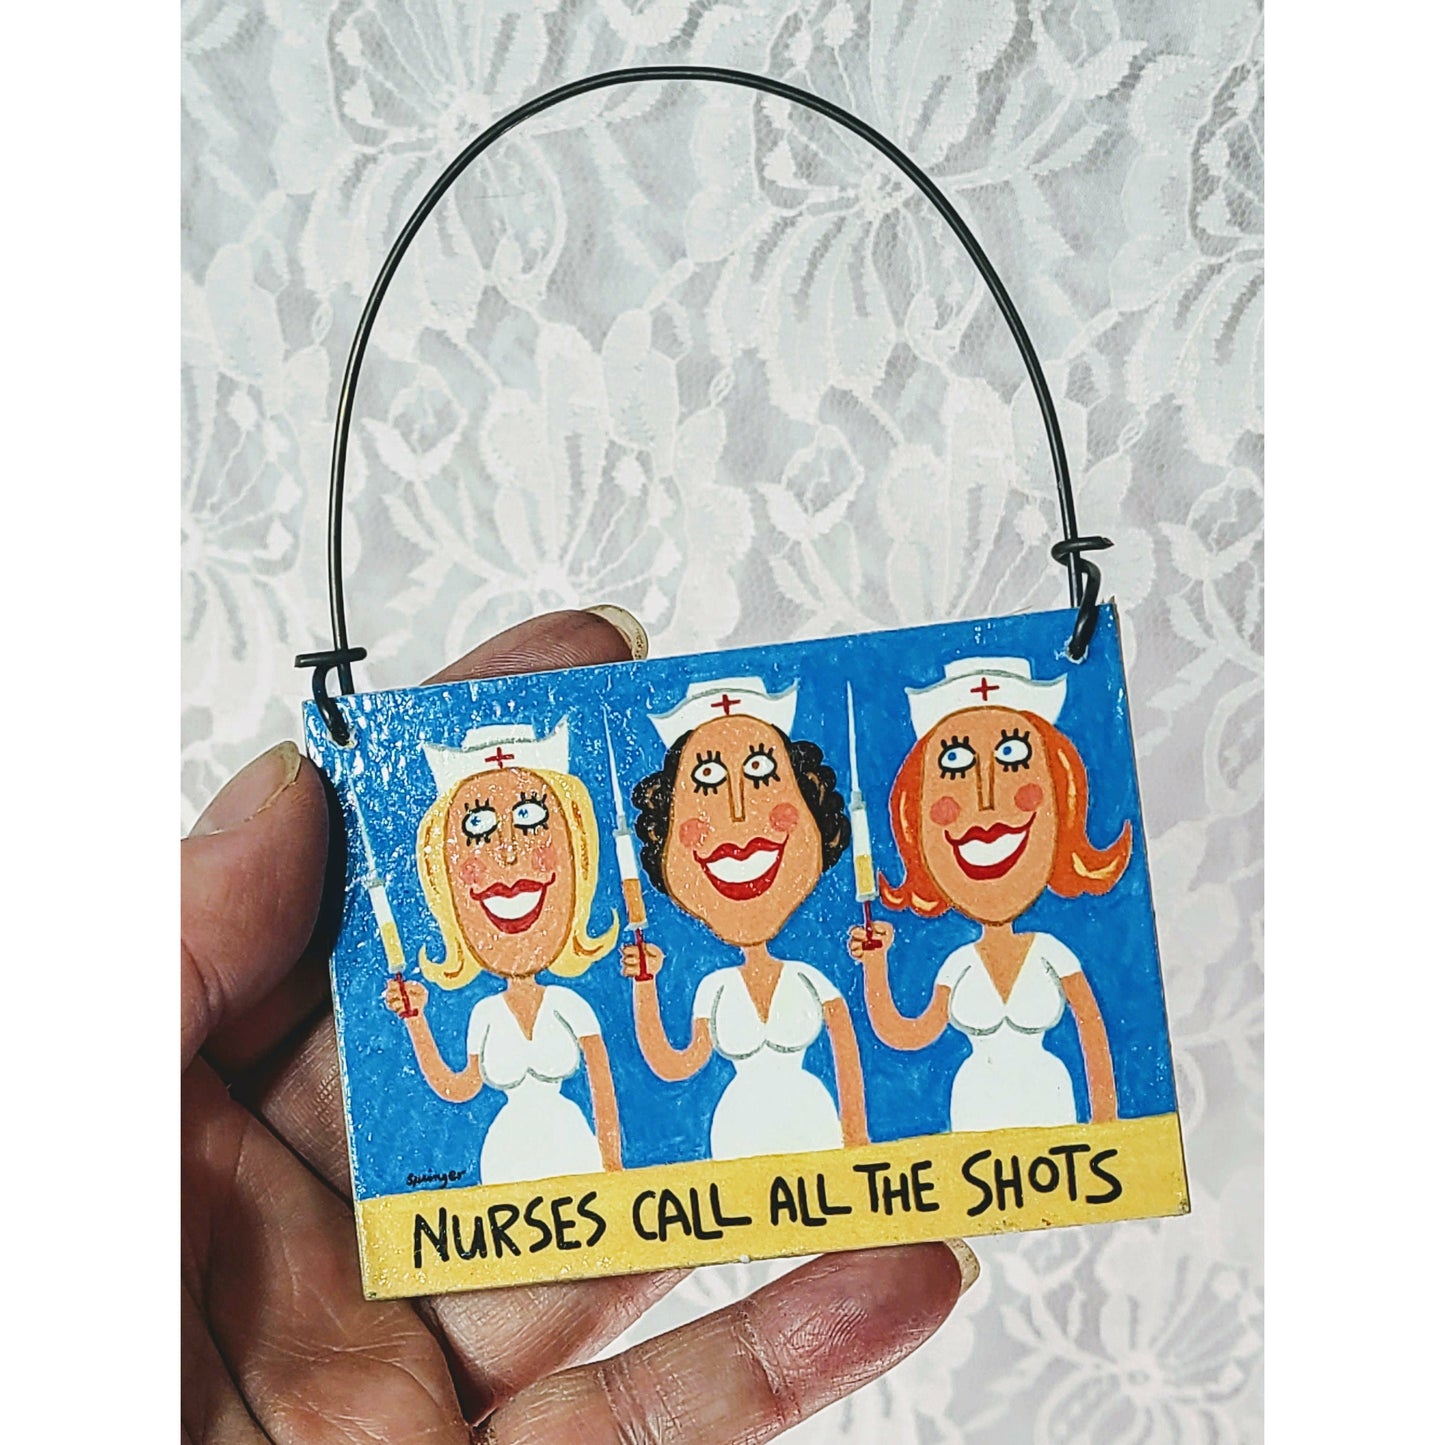 Wood Novelty Sign ~Nurse Gift ~"Nurses Call All The Shots" ~Wall Hanging Ornament ~ Small 3.5" by 2.5" ~ Gift for Healthcare Worker